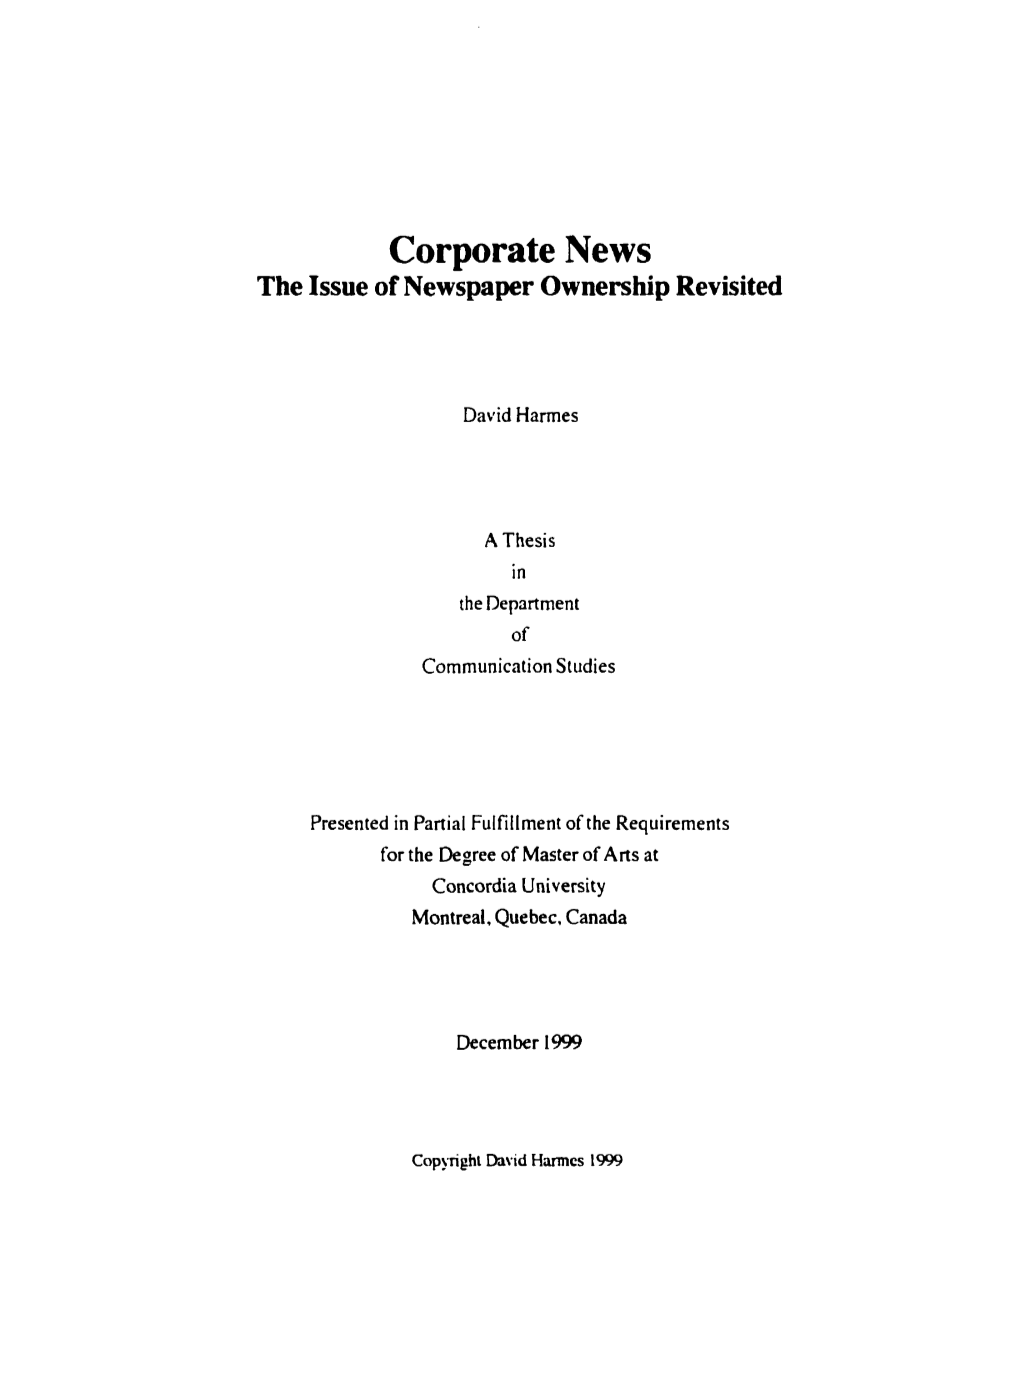 Corporate News the Issue of Newspaper Ownership Revisited